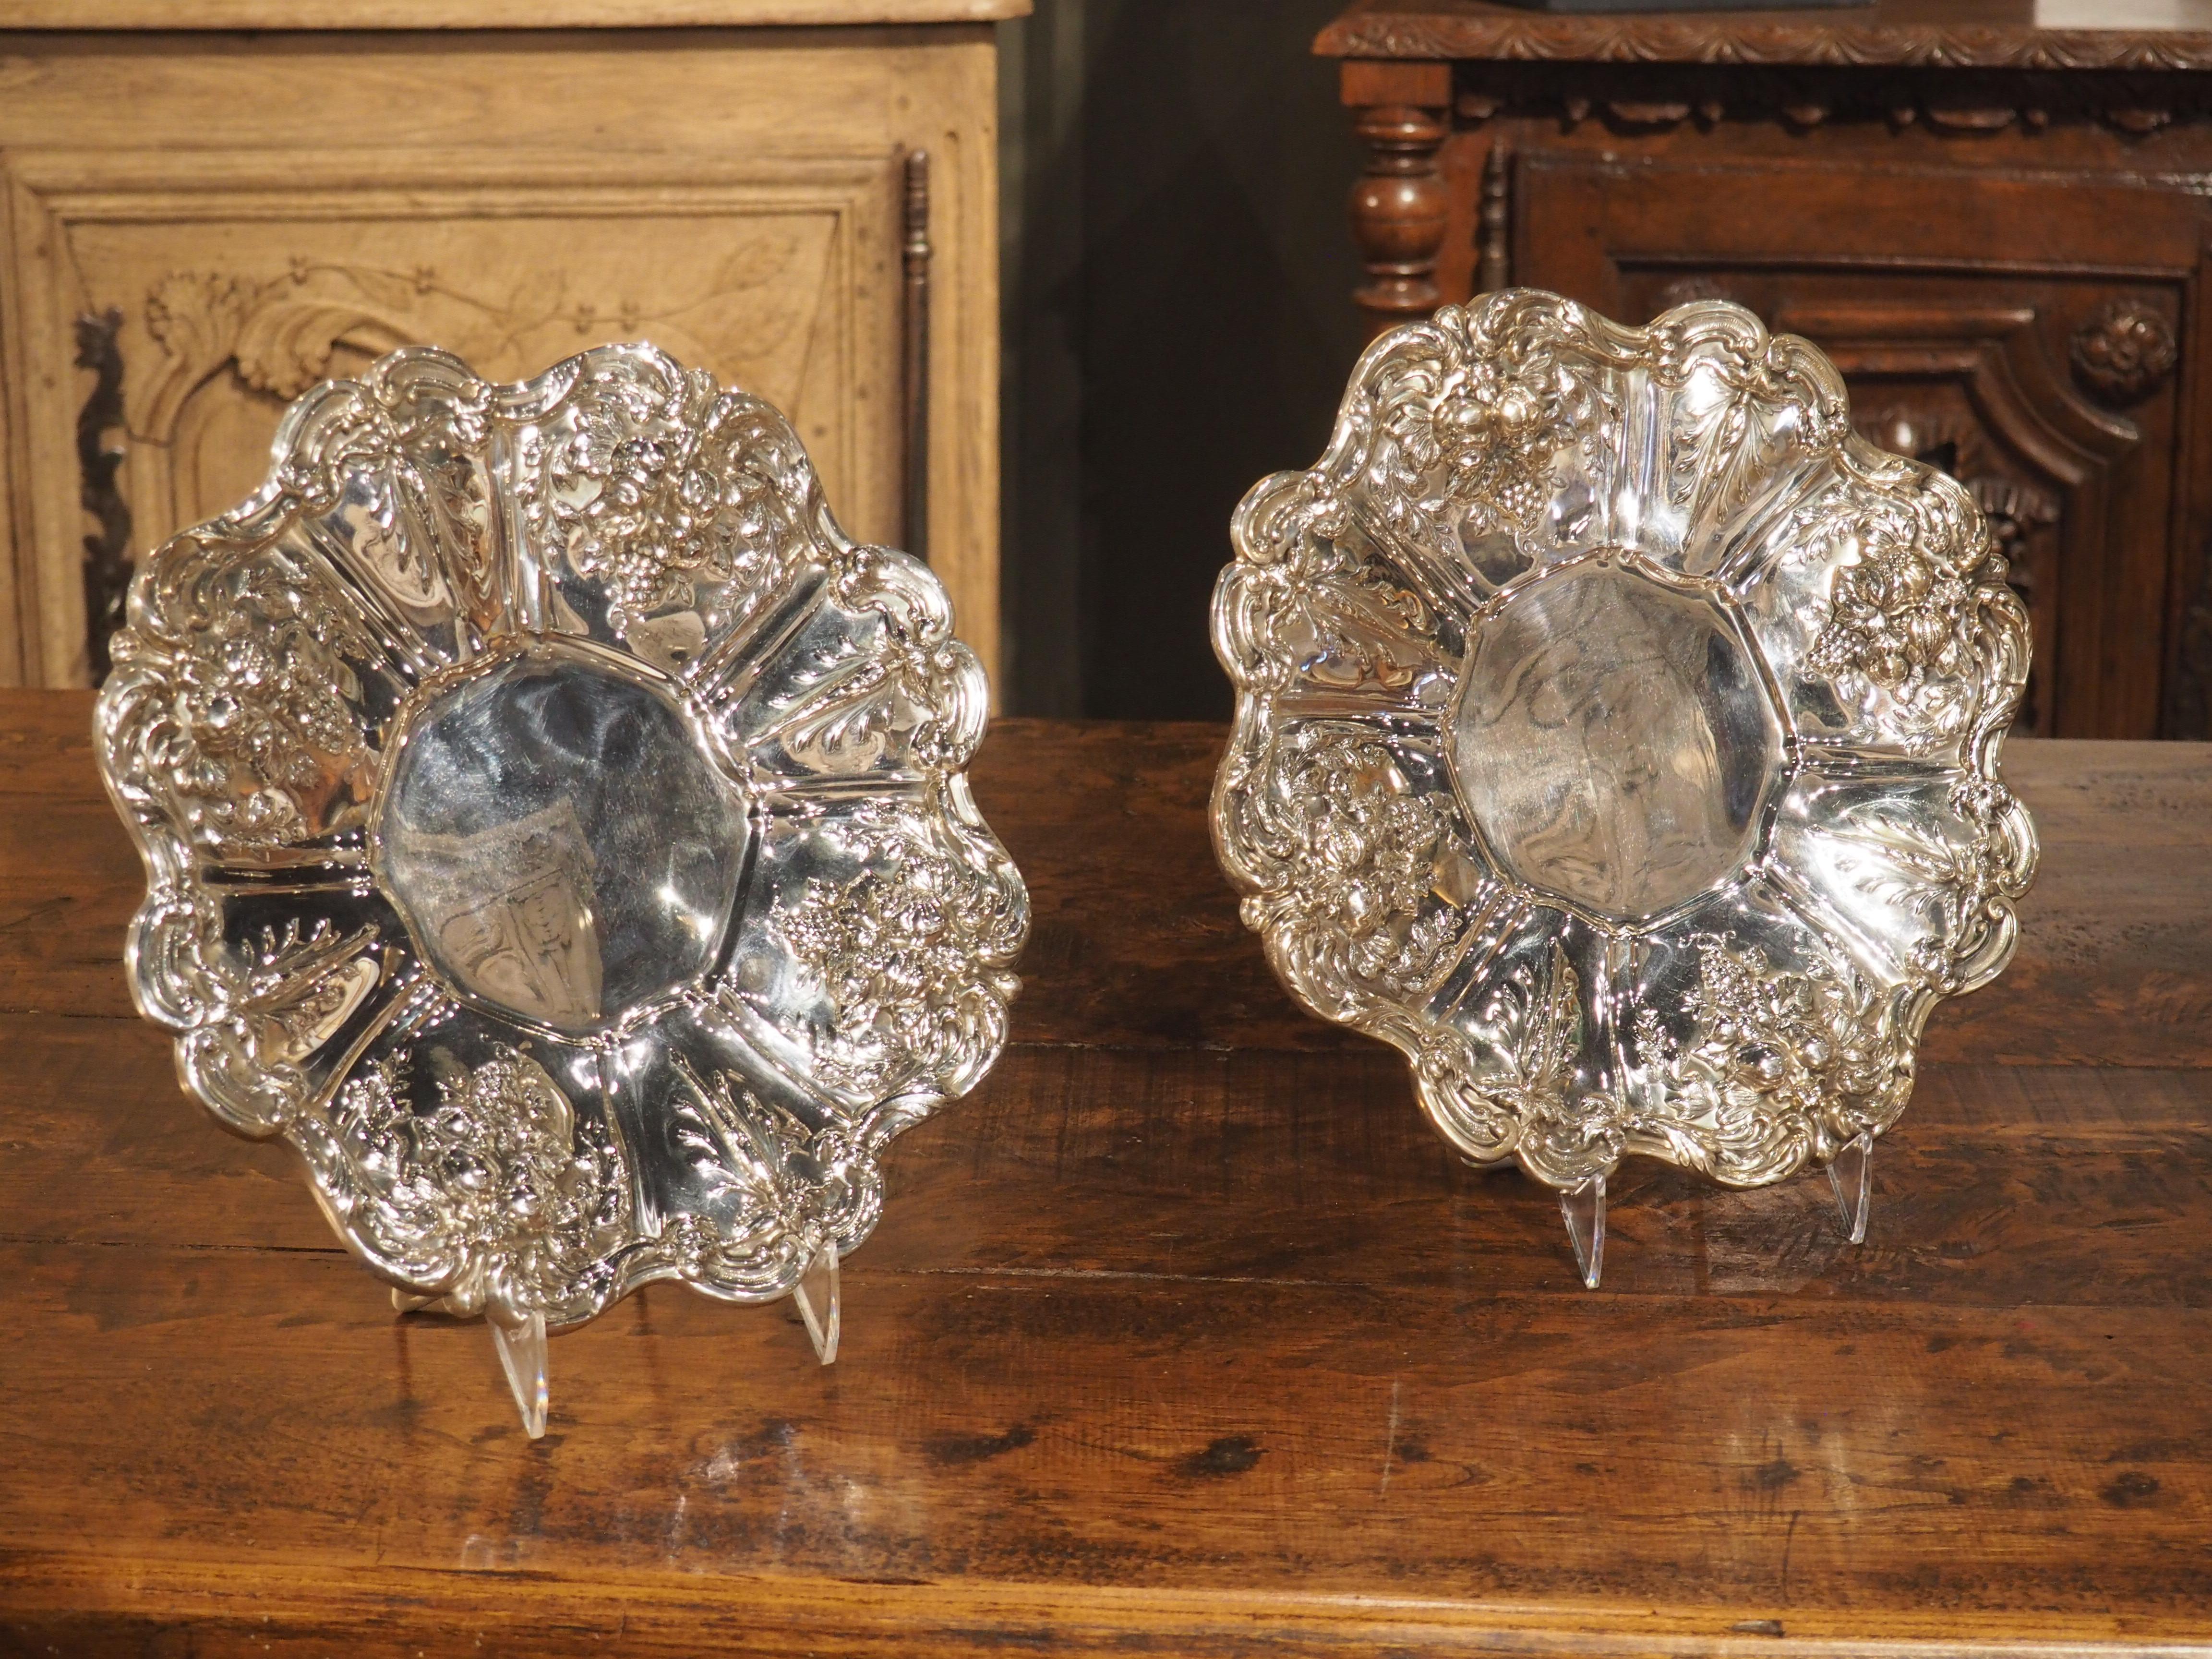 Repoussé Pair of Scalloped Sterling Silver Platters with Repousse Fruit Motifs For Sale